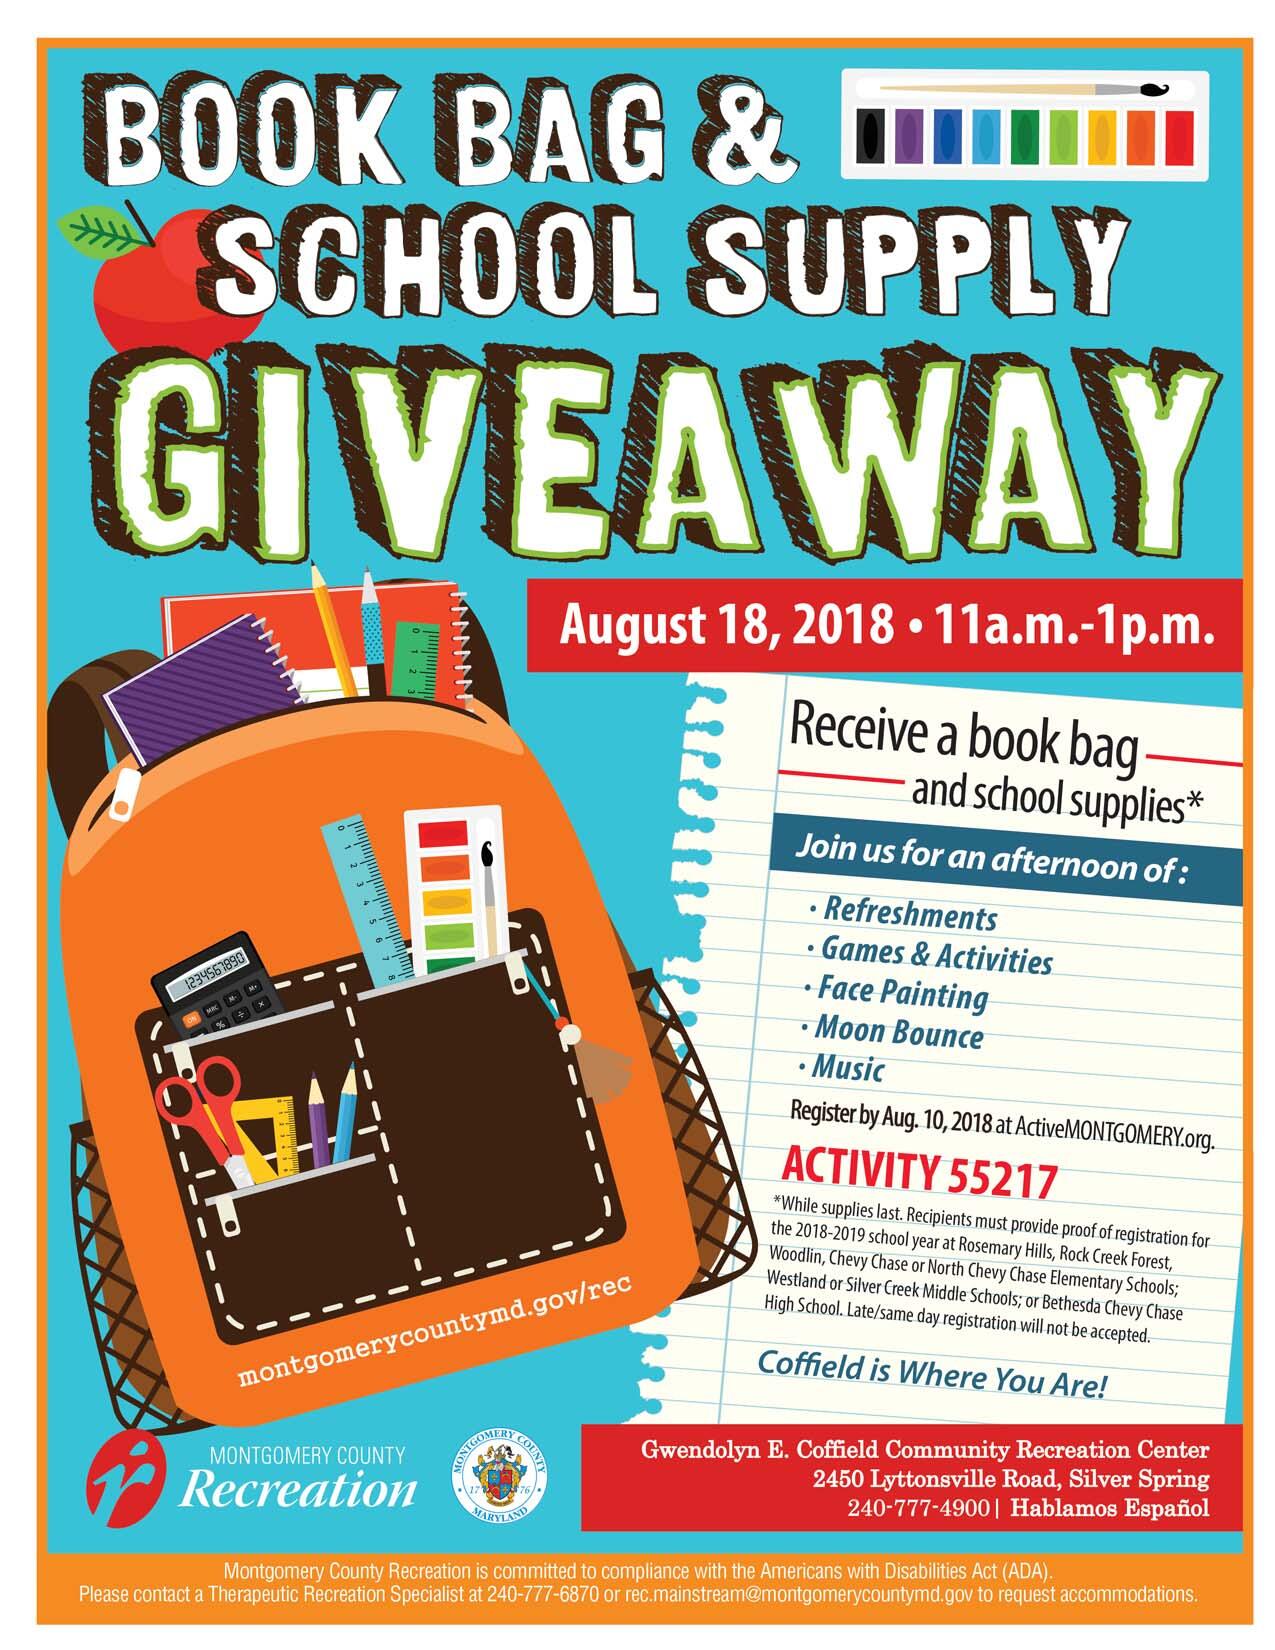 Book Bag & School Supply Giveaway. (Montgomery County Government